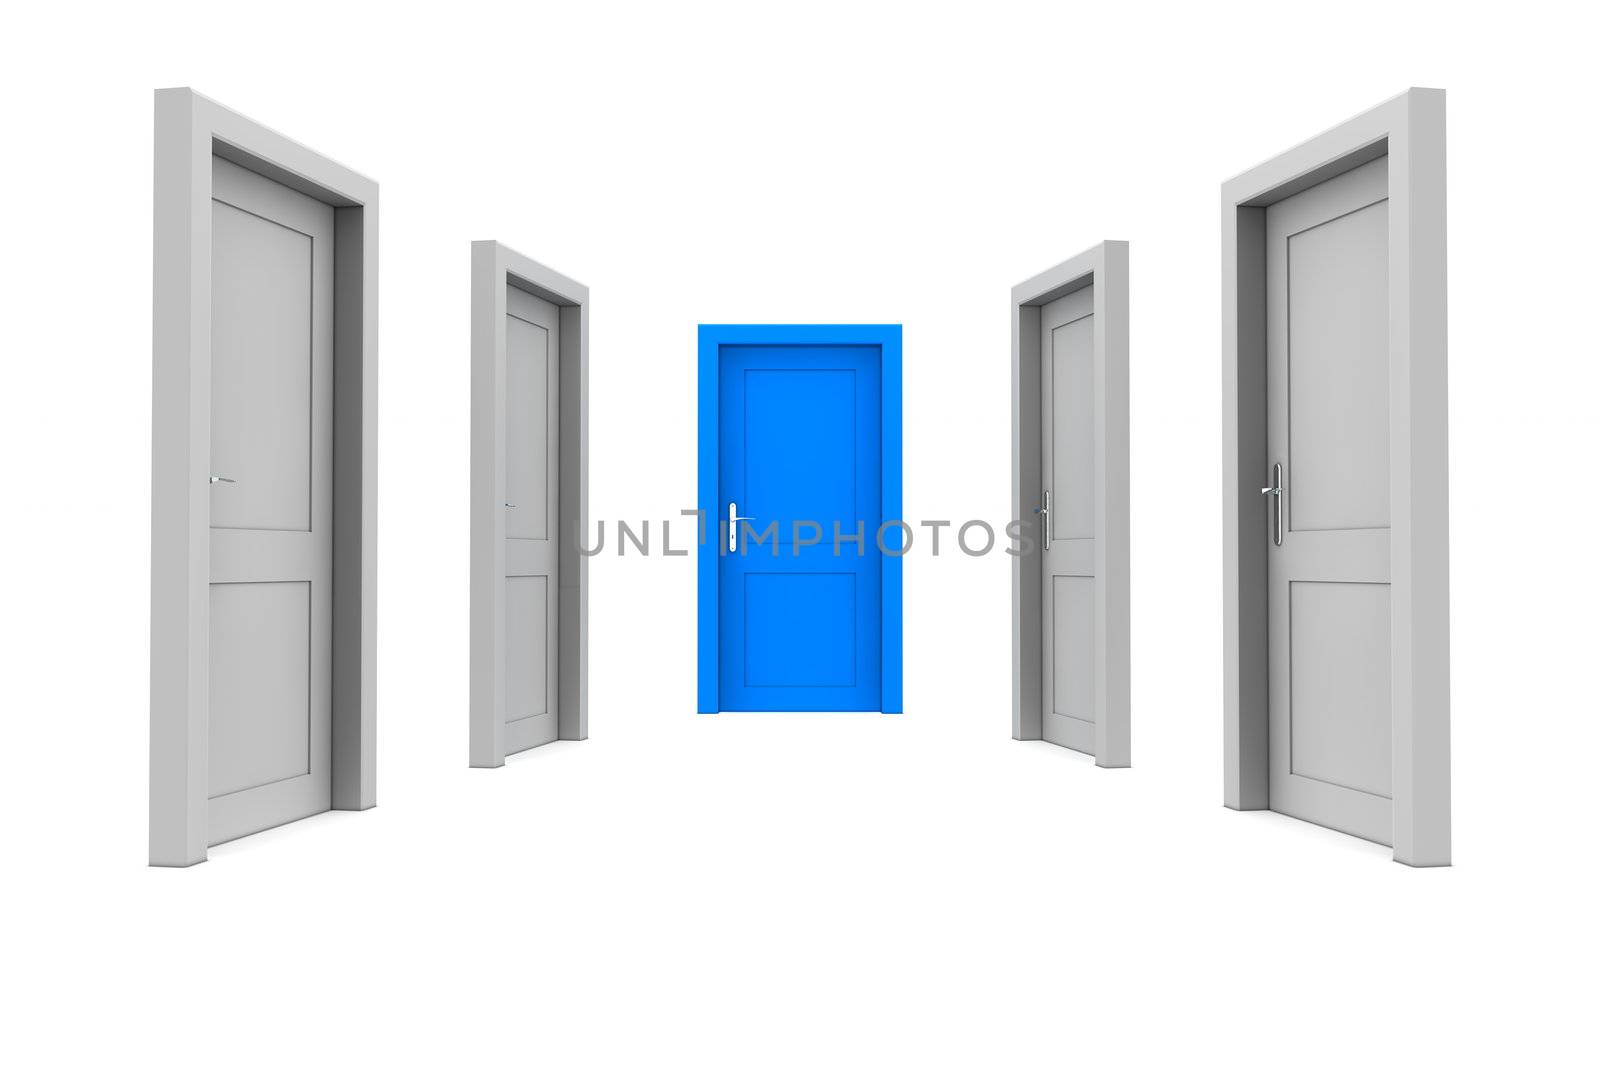 abstract hallway with closed gray doors - one closed blue door at the end of the corridor